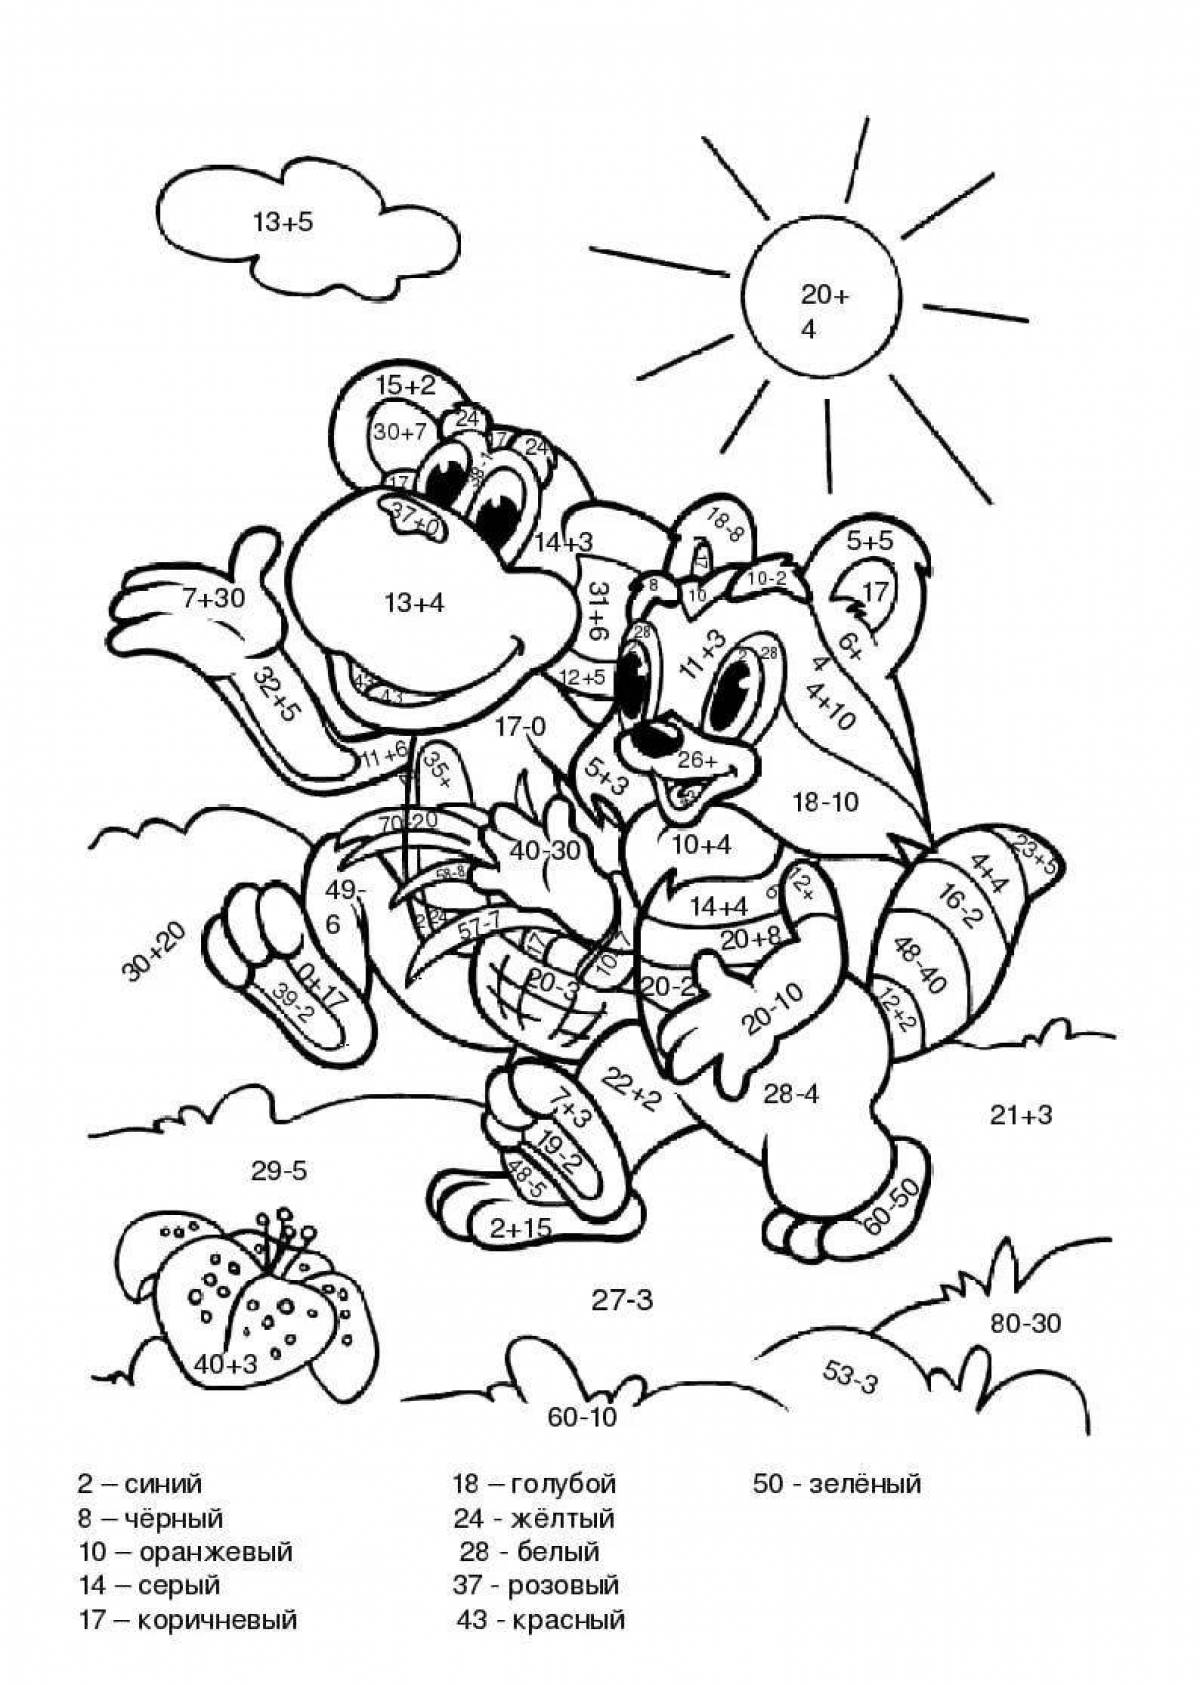 Colorful addition within 100 coloring pages